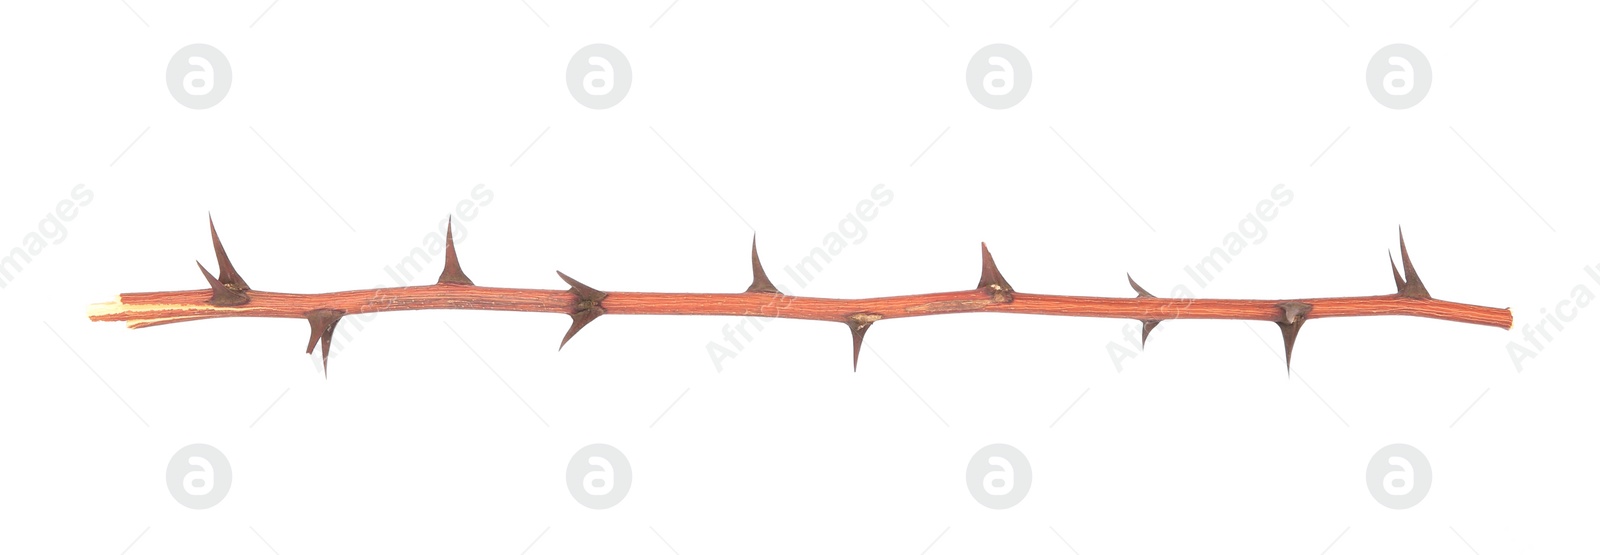 Photo of One dry tree twig with thorns isolated on white